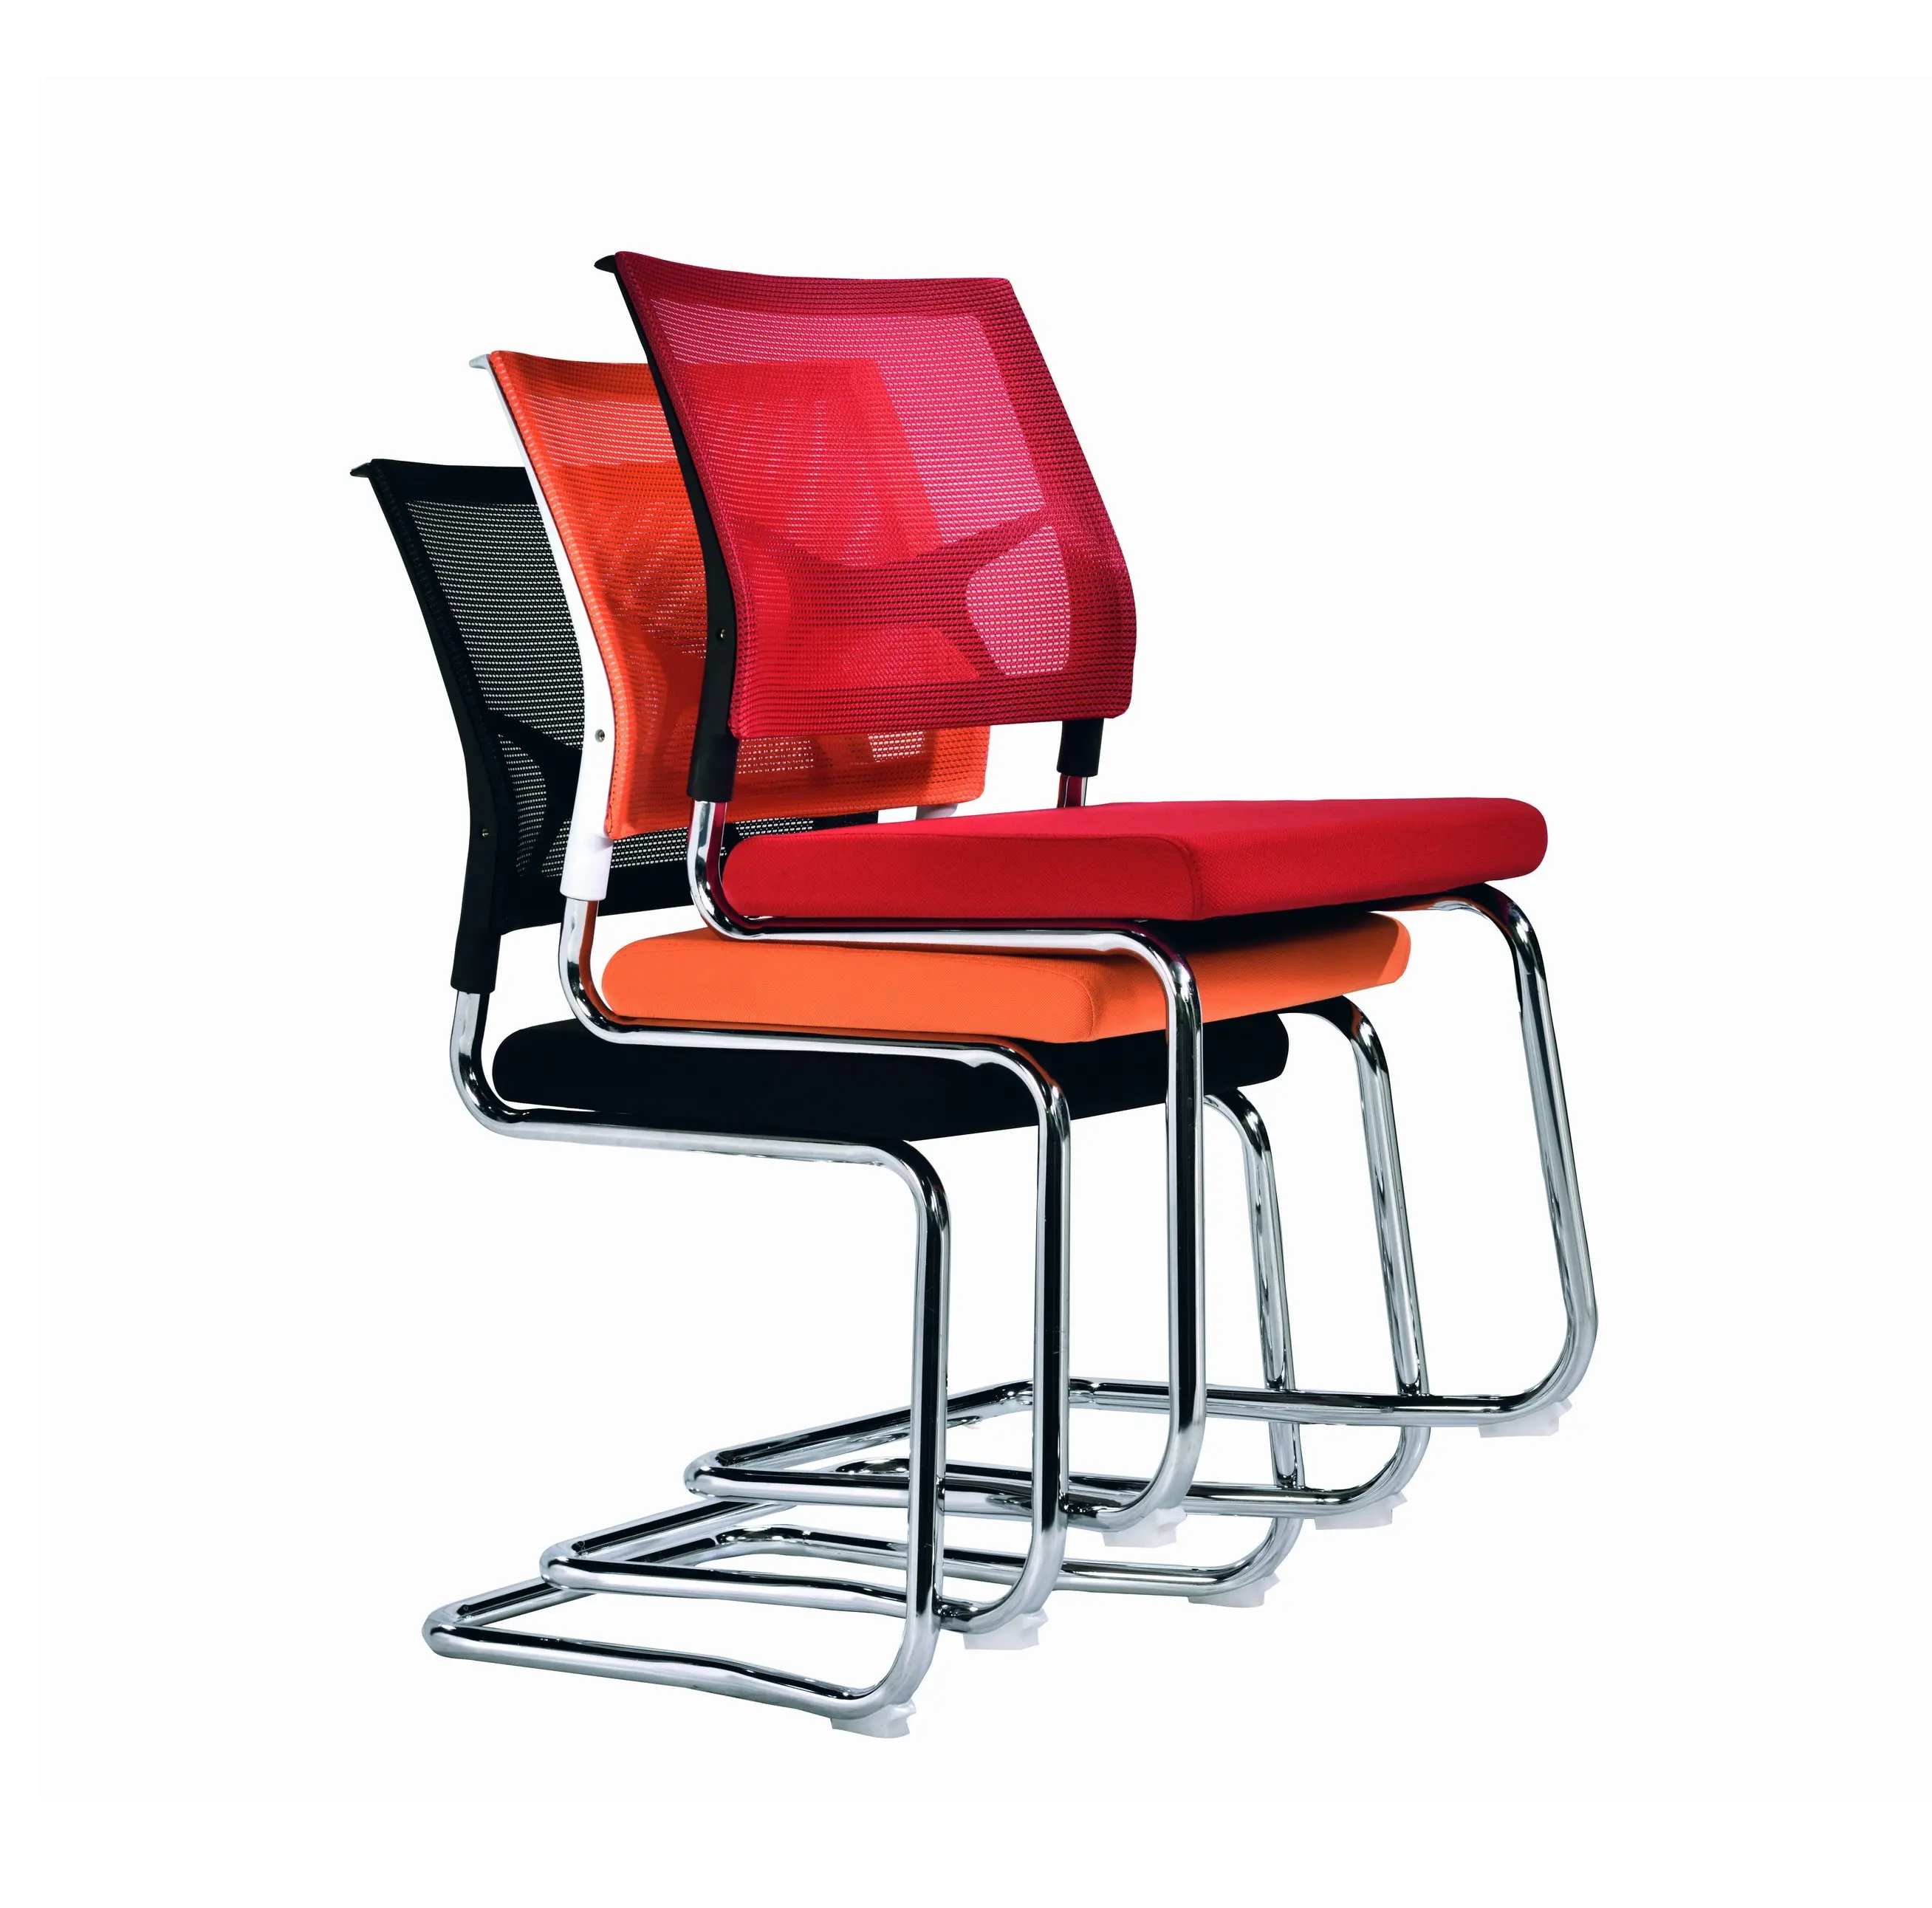 Most good feedback Product modern plastic chair stackable colorful reception office chair visitor chair low back